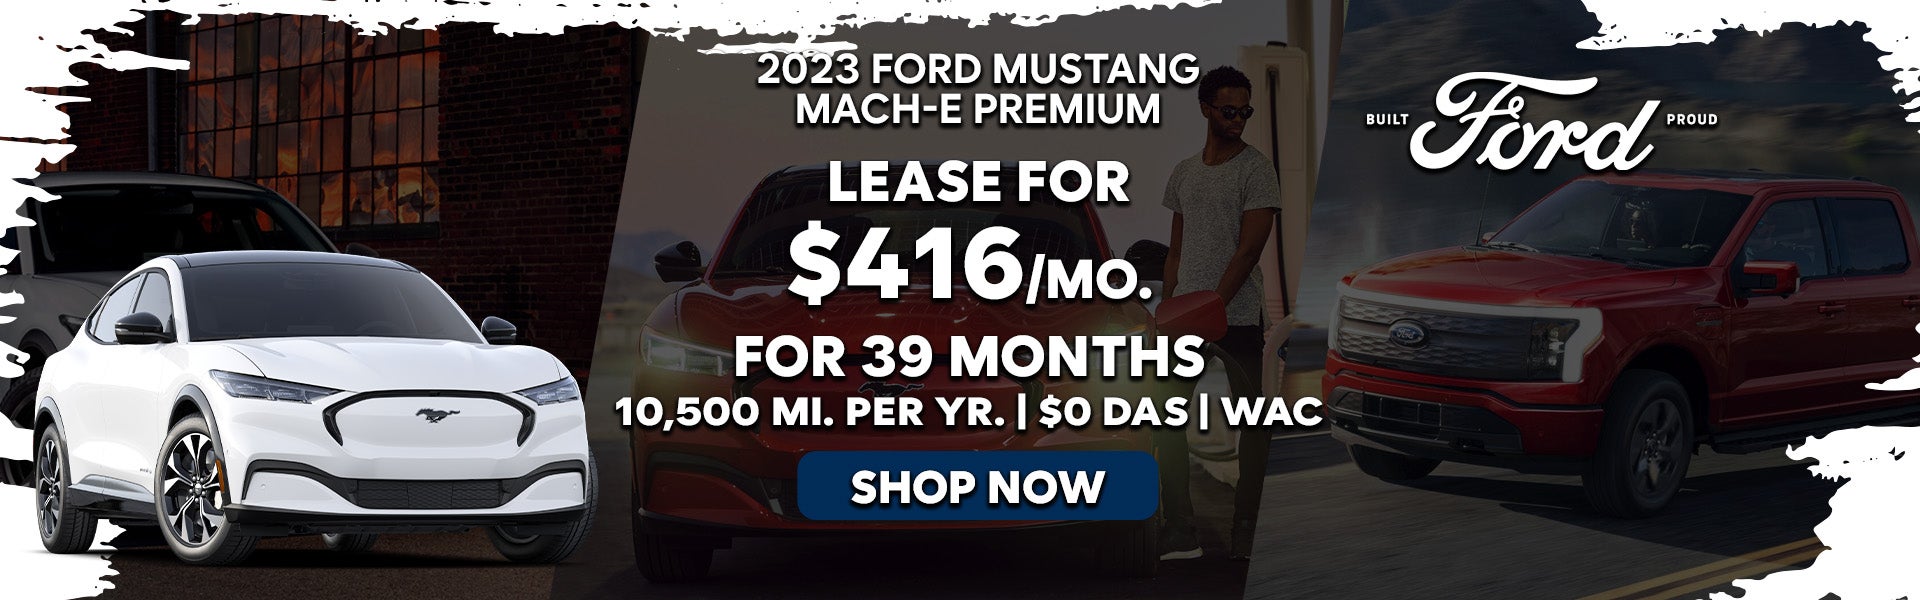 2023 Ford Mustang Mach-E Premium Special Offer